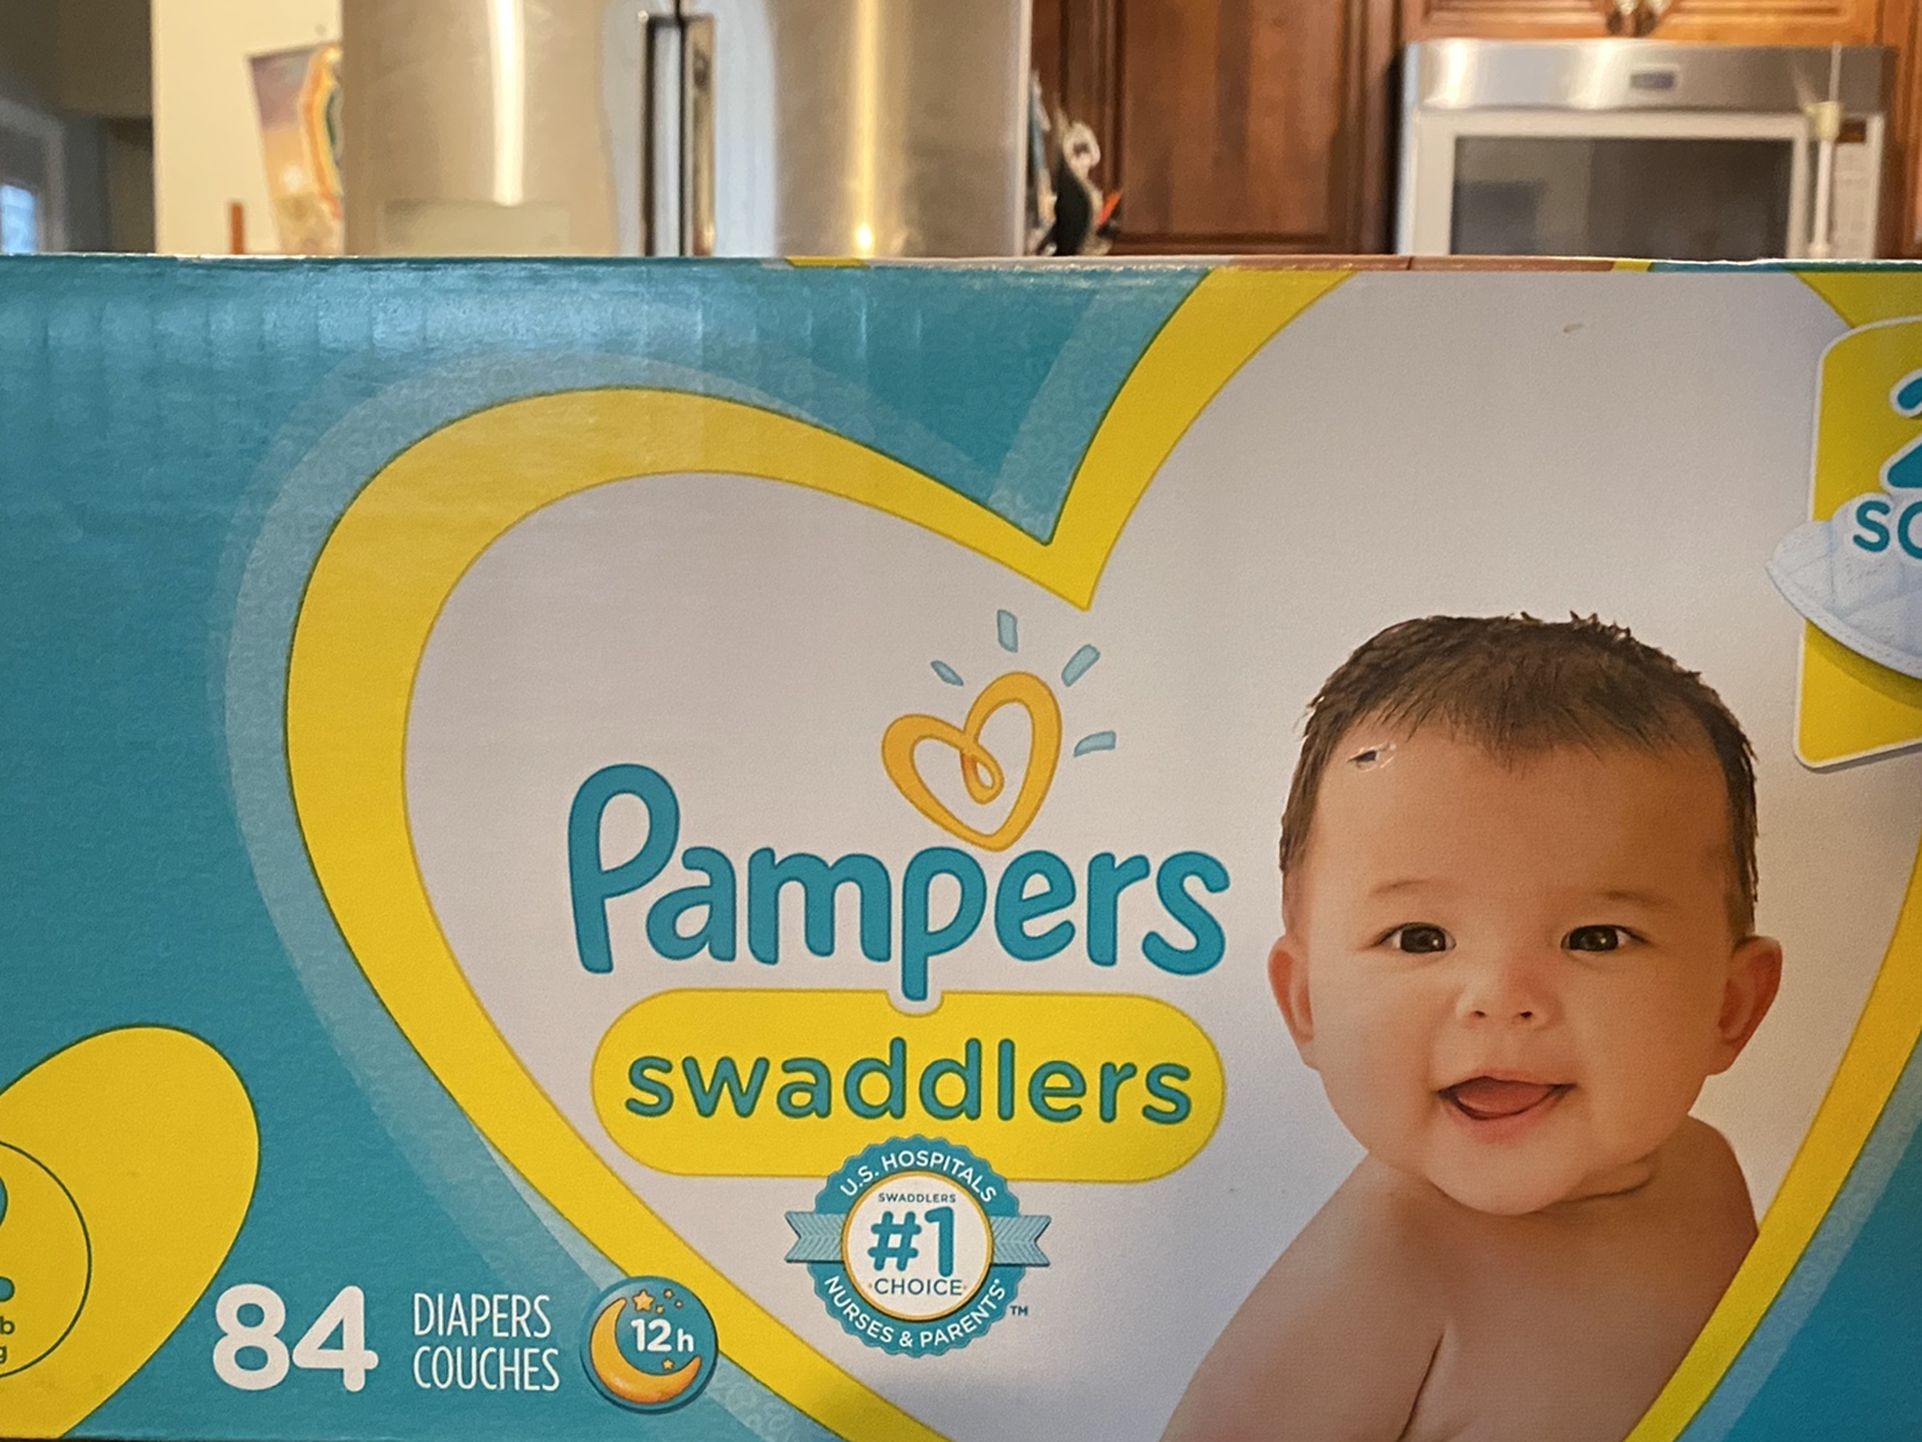 Pampers Diapers Size 2